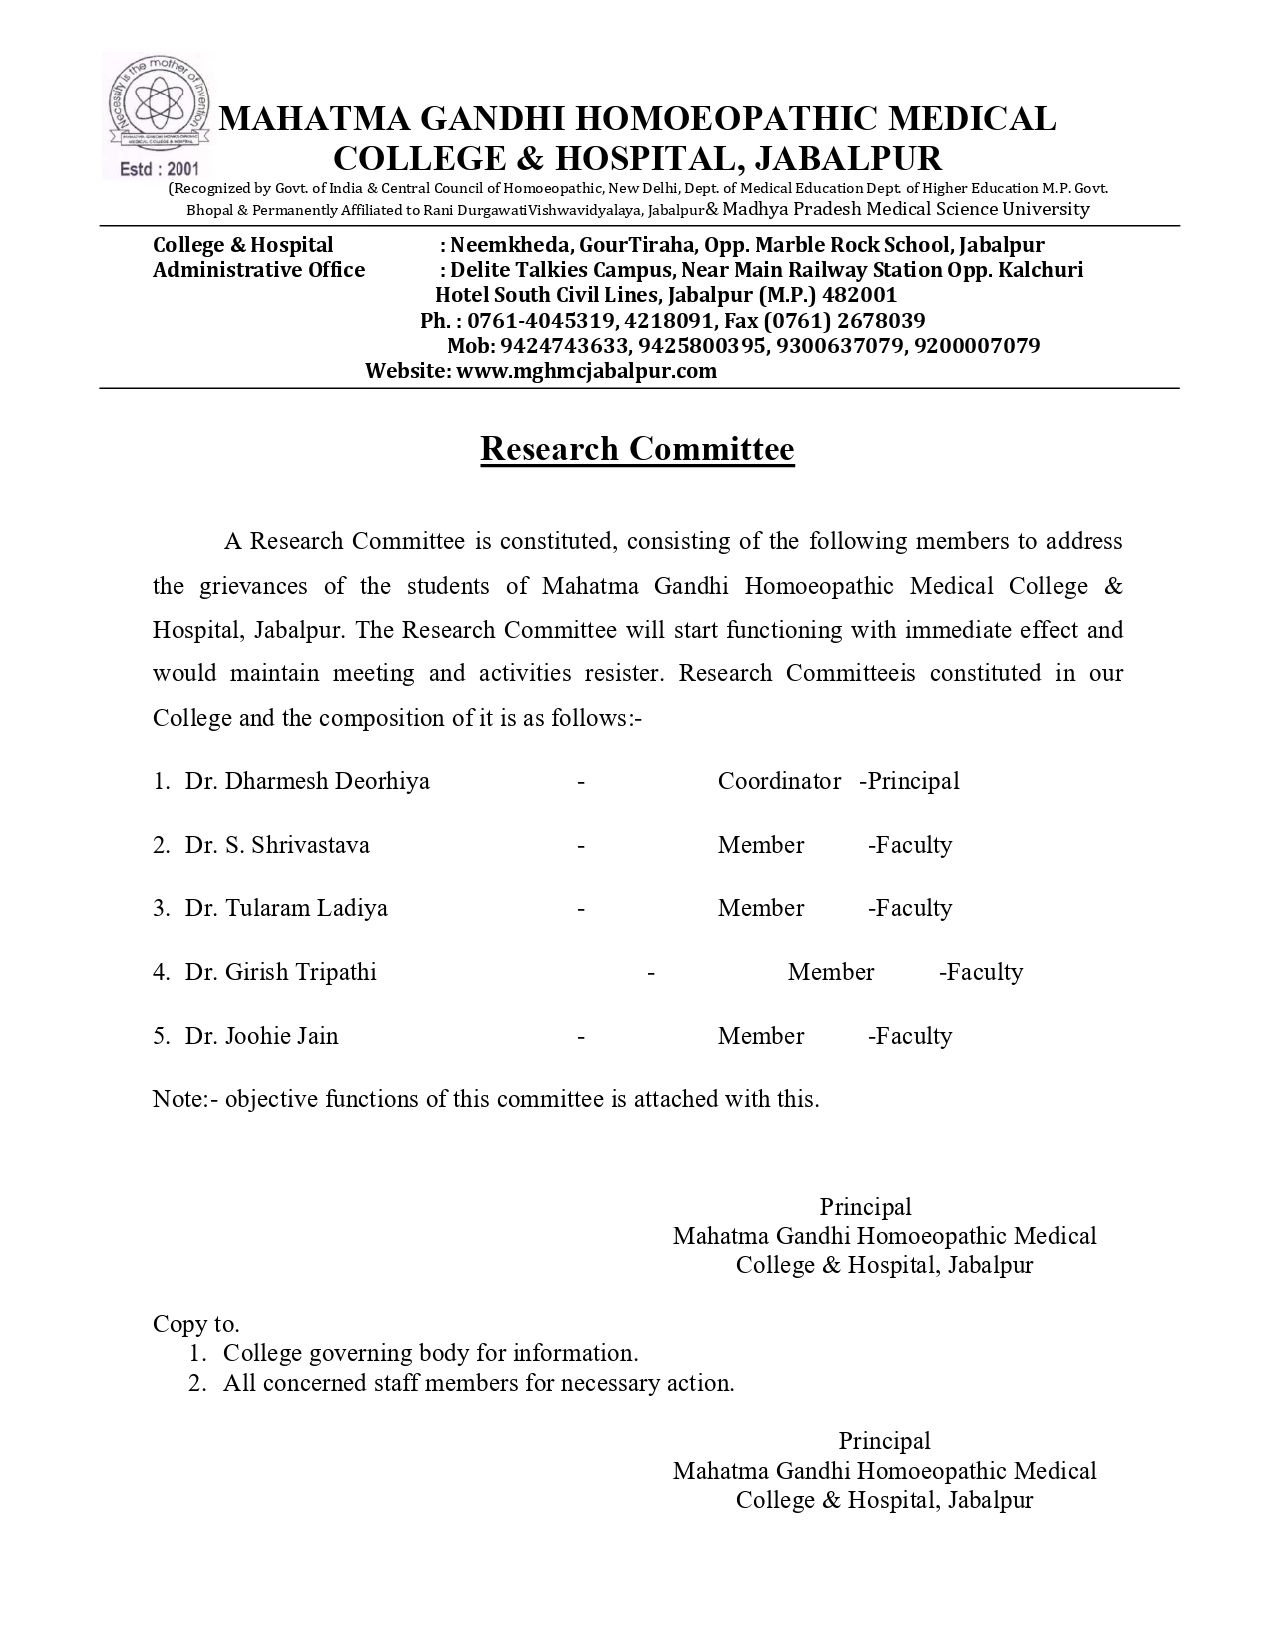 Mahatma Gandhi Homoeopathic Medical College & Hospital Research Committee